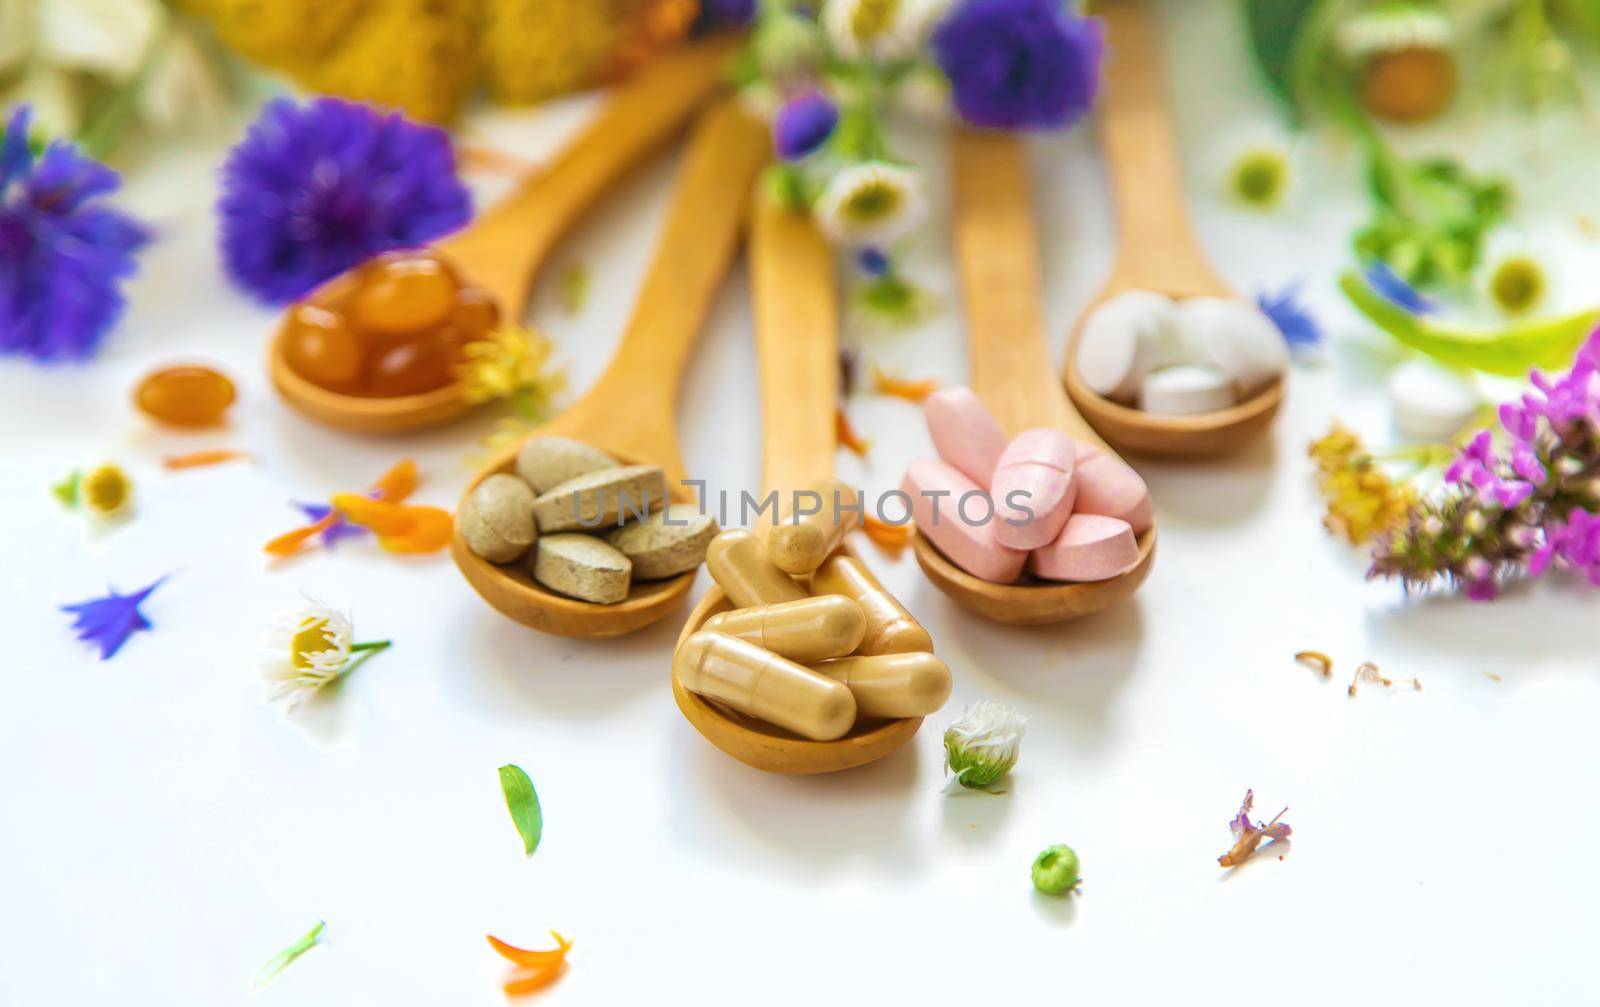 Homeopathy and dietary supplements from medicinal herbs. Selective focus. by yanadjana